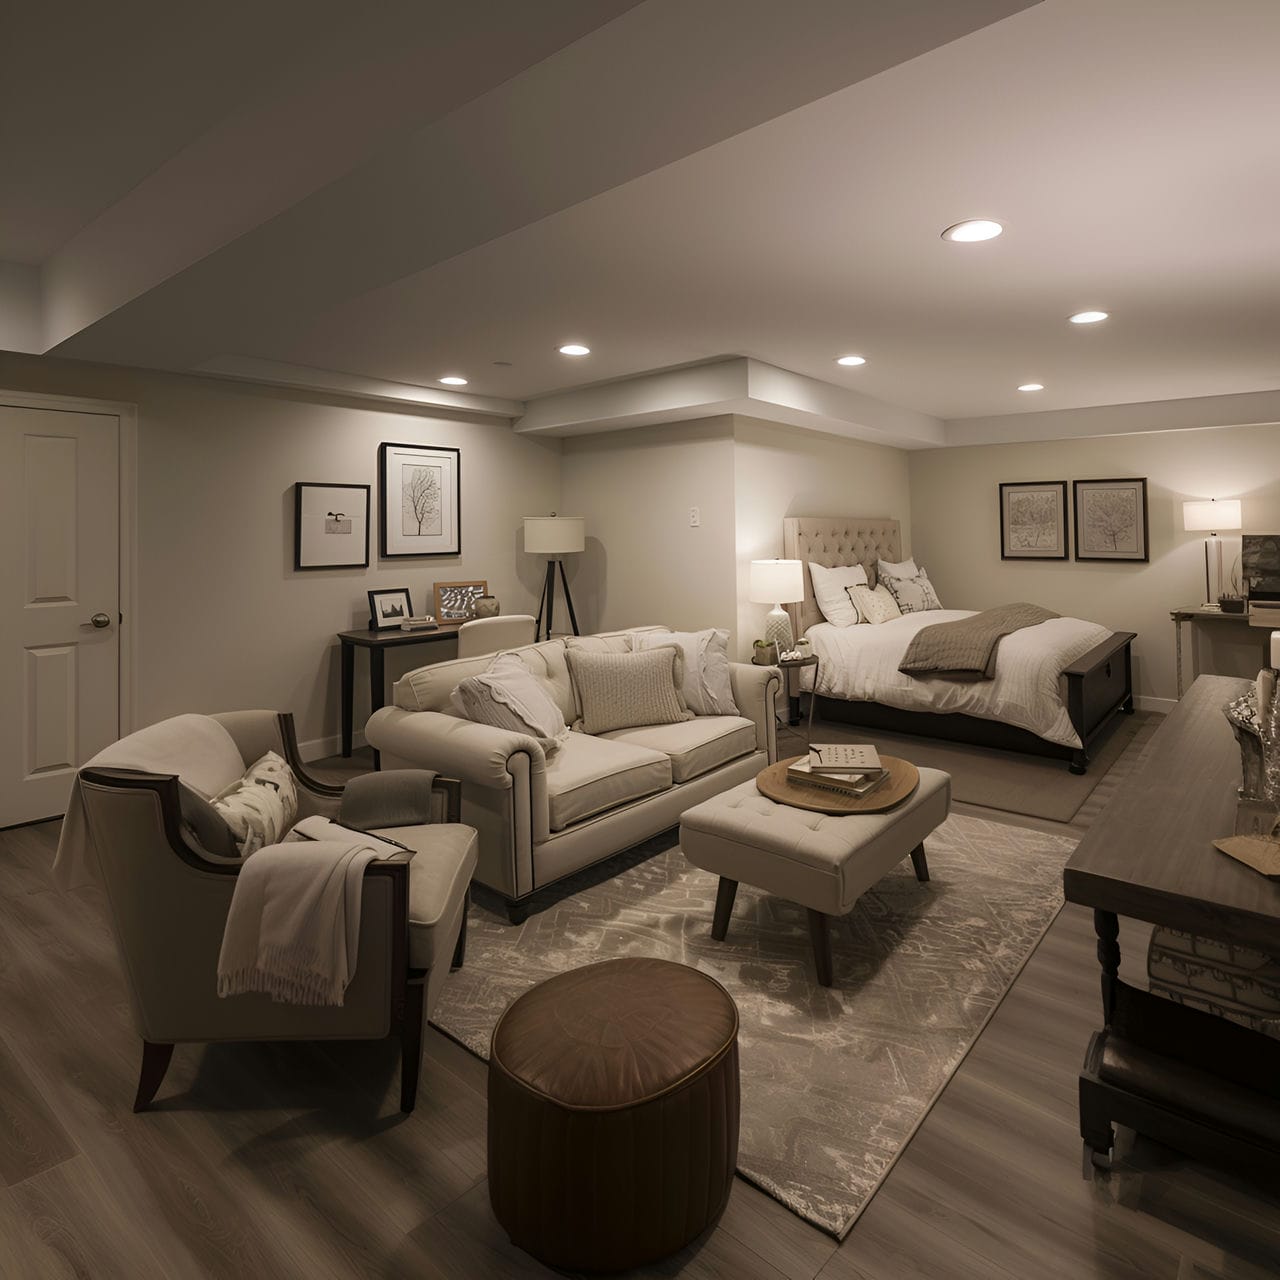 Basement: size, functionality, uses, furniture and renovation